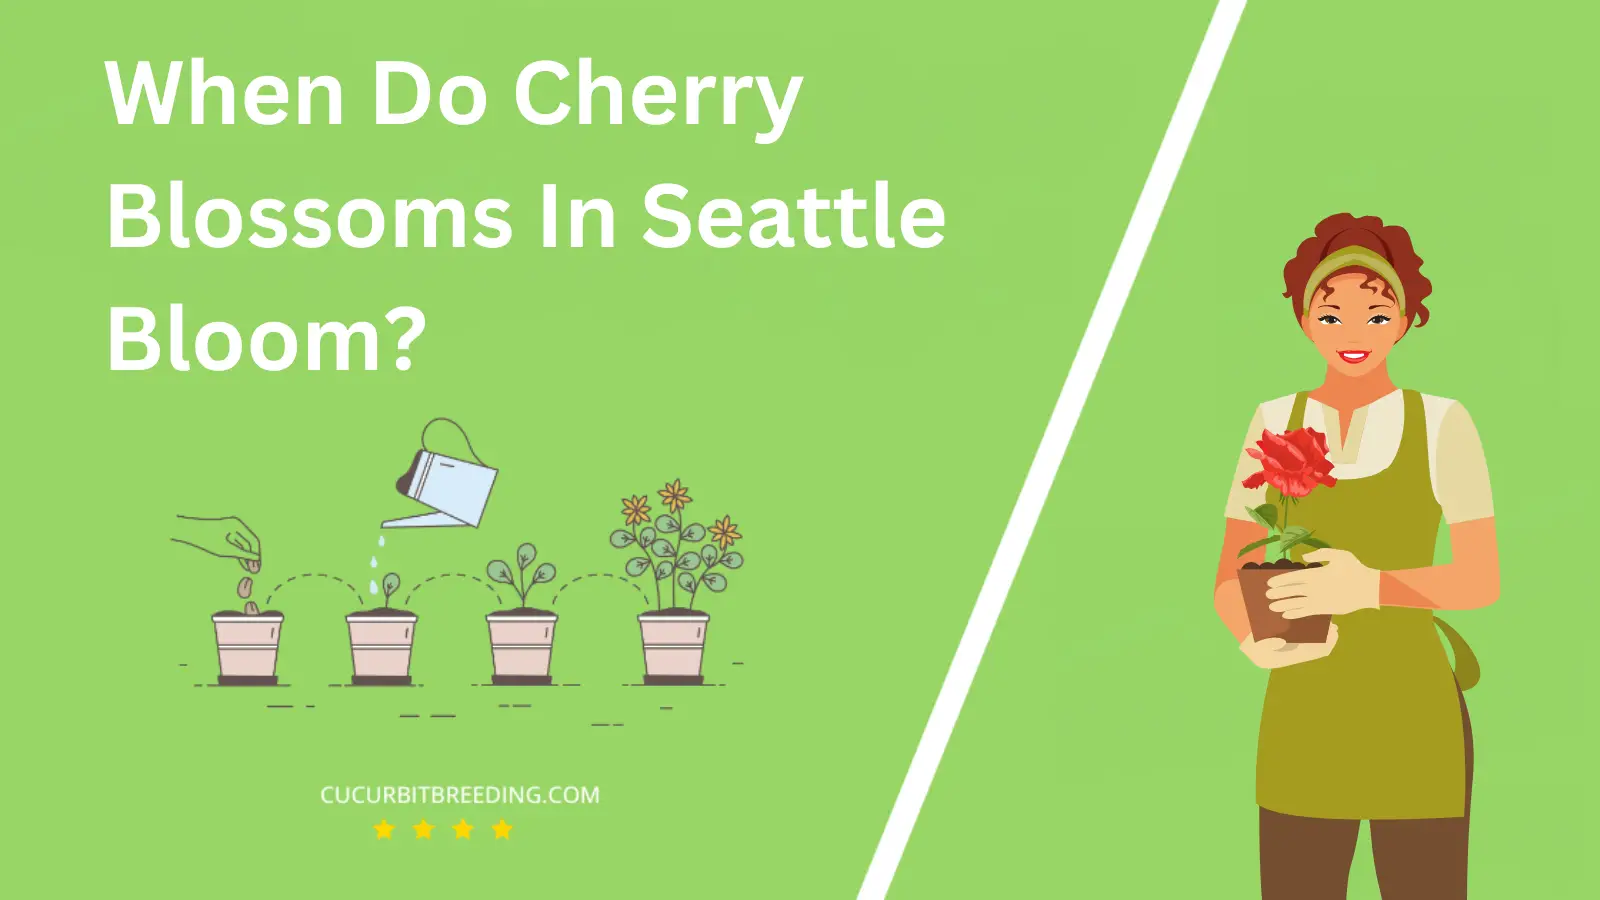 When Do Cherry Blossoms In Seattle Bloom?